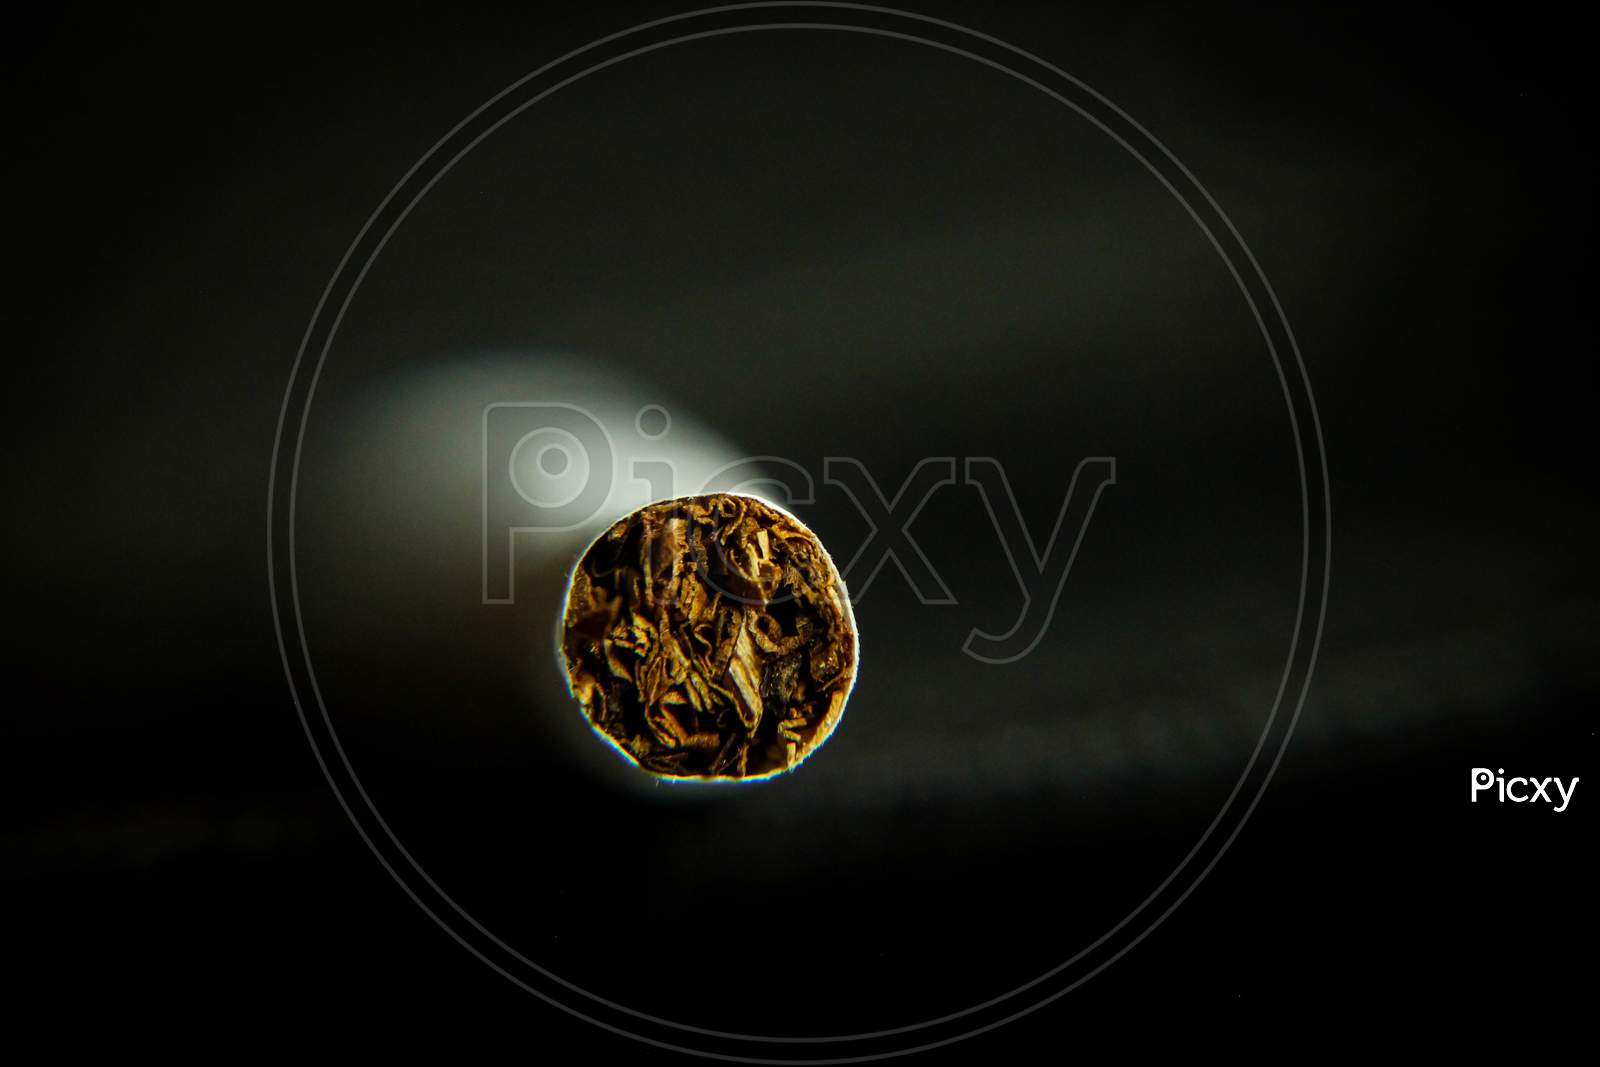 Macro photography of cigarette, Focus point on tobacco inside the cigarette. Tobacco is injurious to health , Cigarette causes cancer